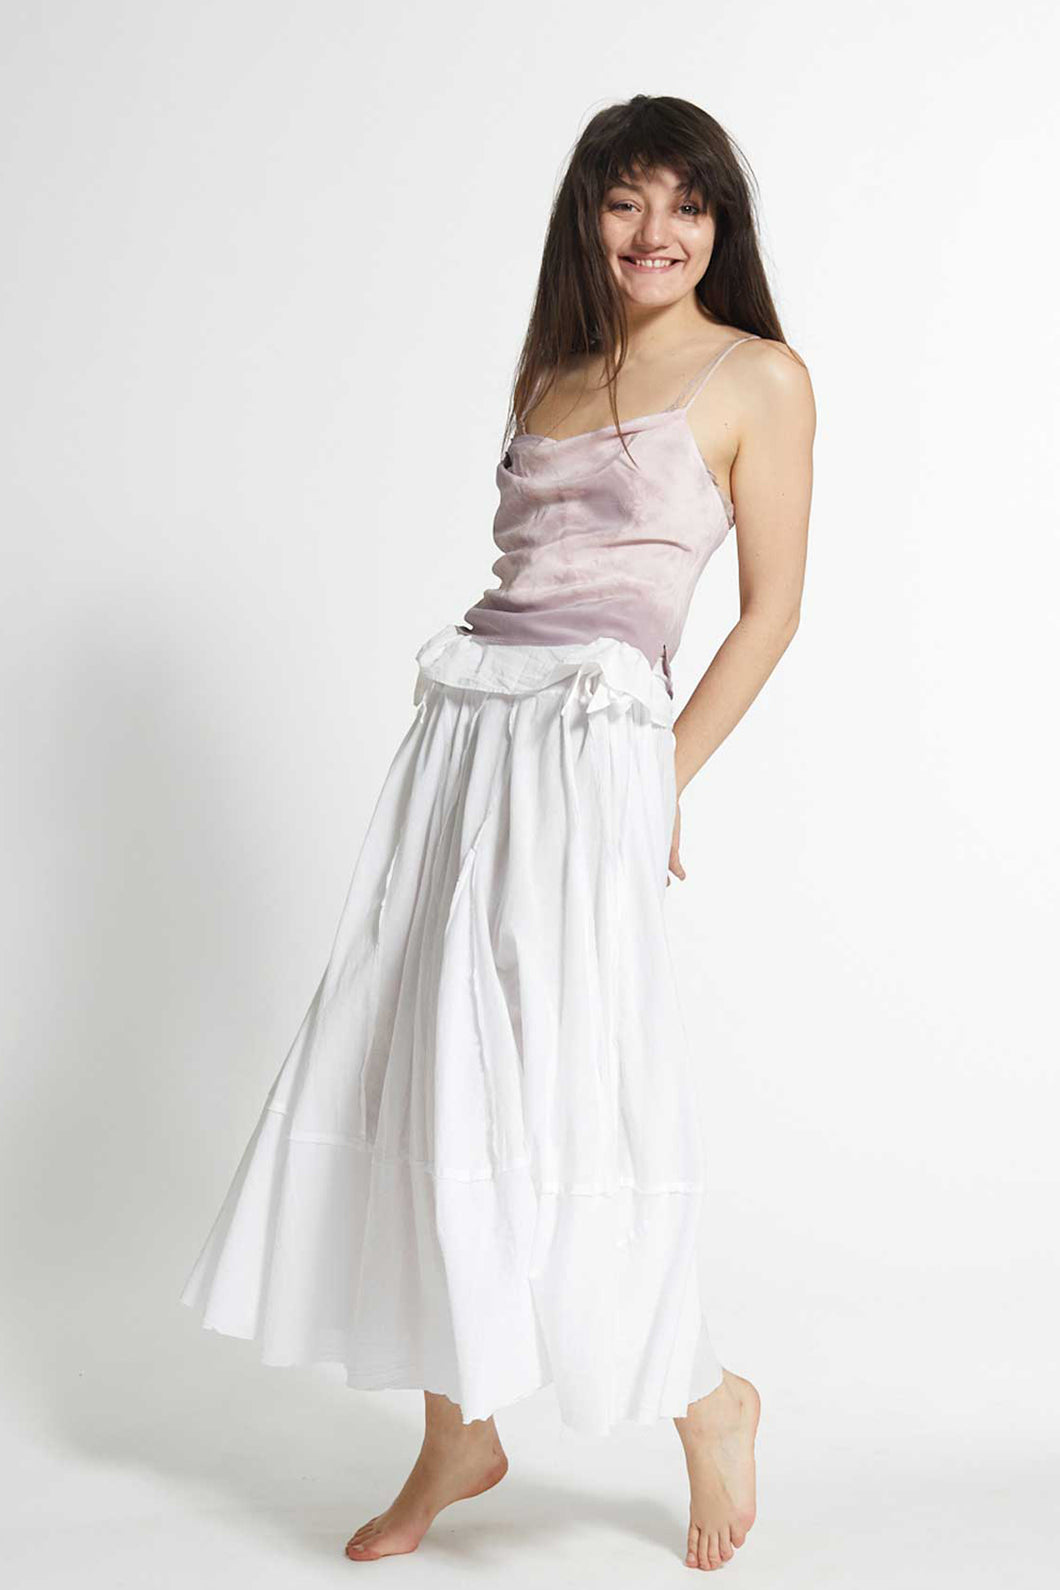 26 panel skirt made of 100% cotton voile make up this skirt with 18 foot circumference at the bottom when fully extended.  This skirt drapes beautifully with a beautiful flow.